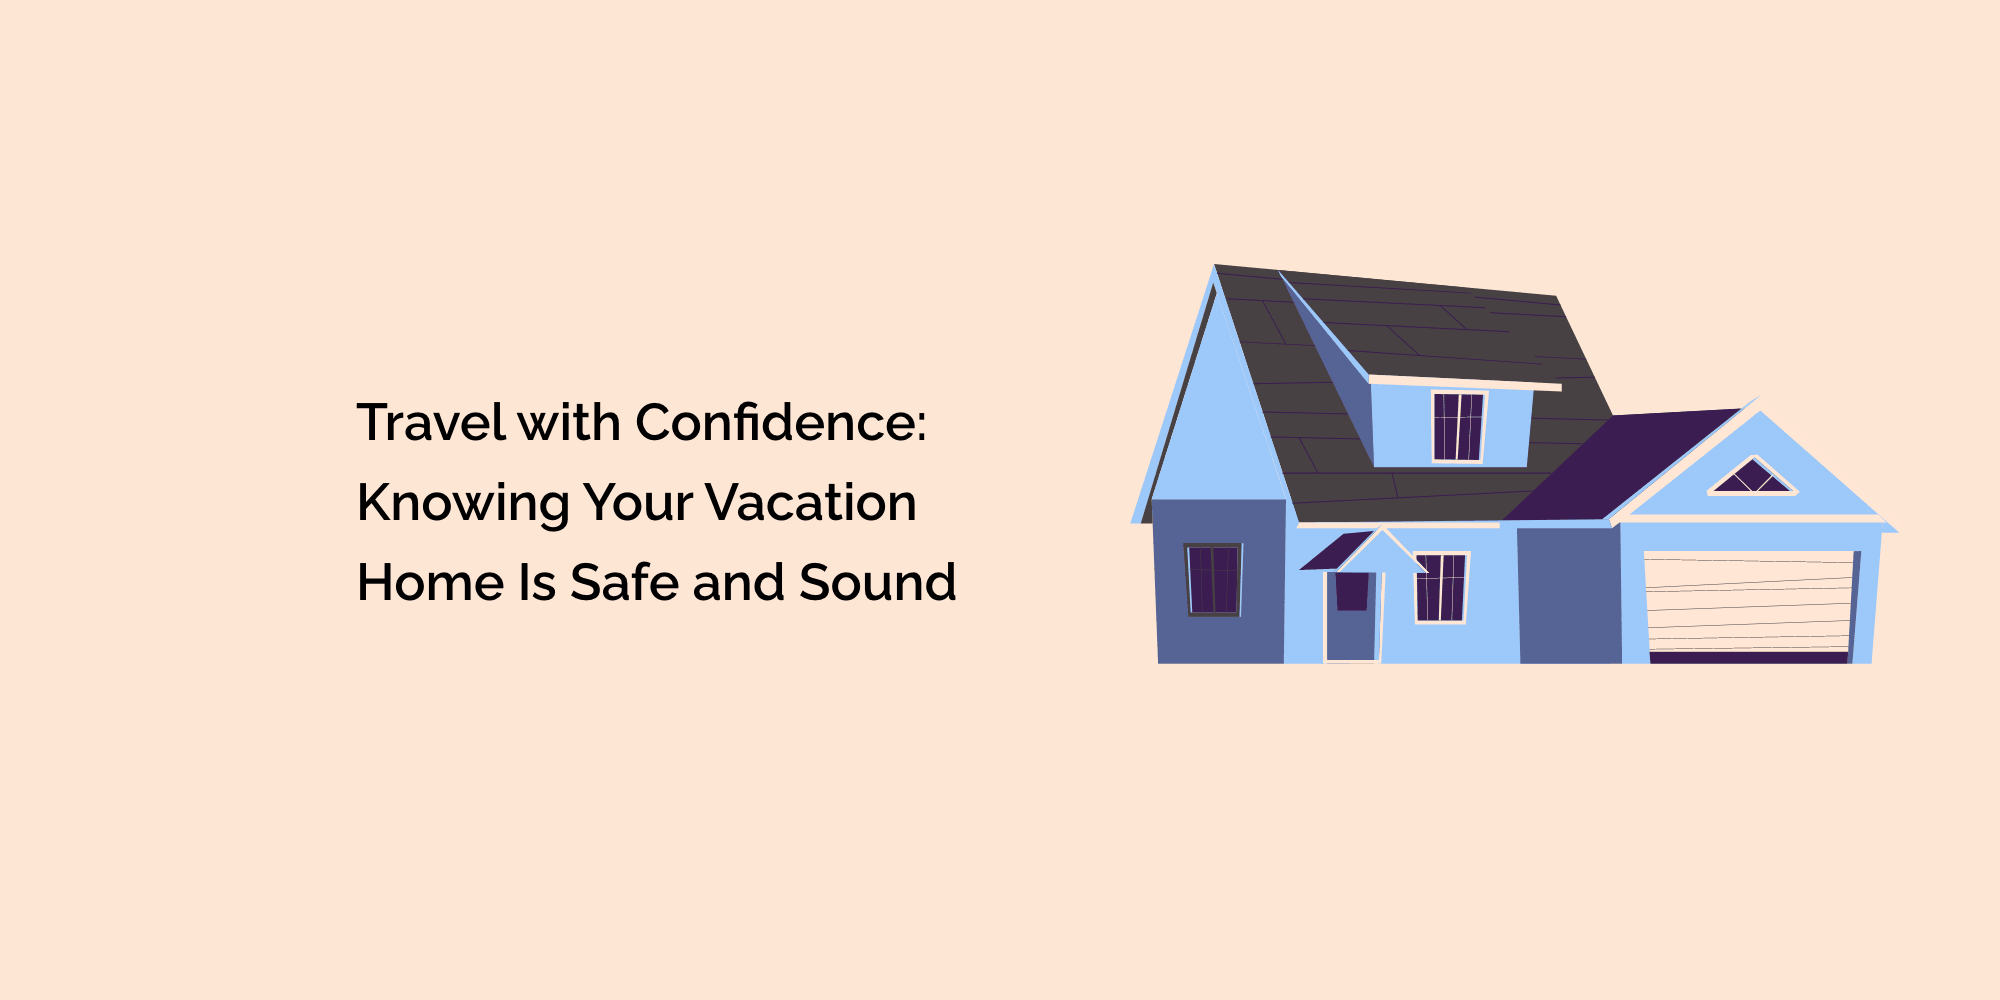 Travel with Confidence: Knowing Your Vacation Home Is Safe and Sound